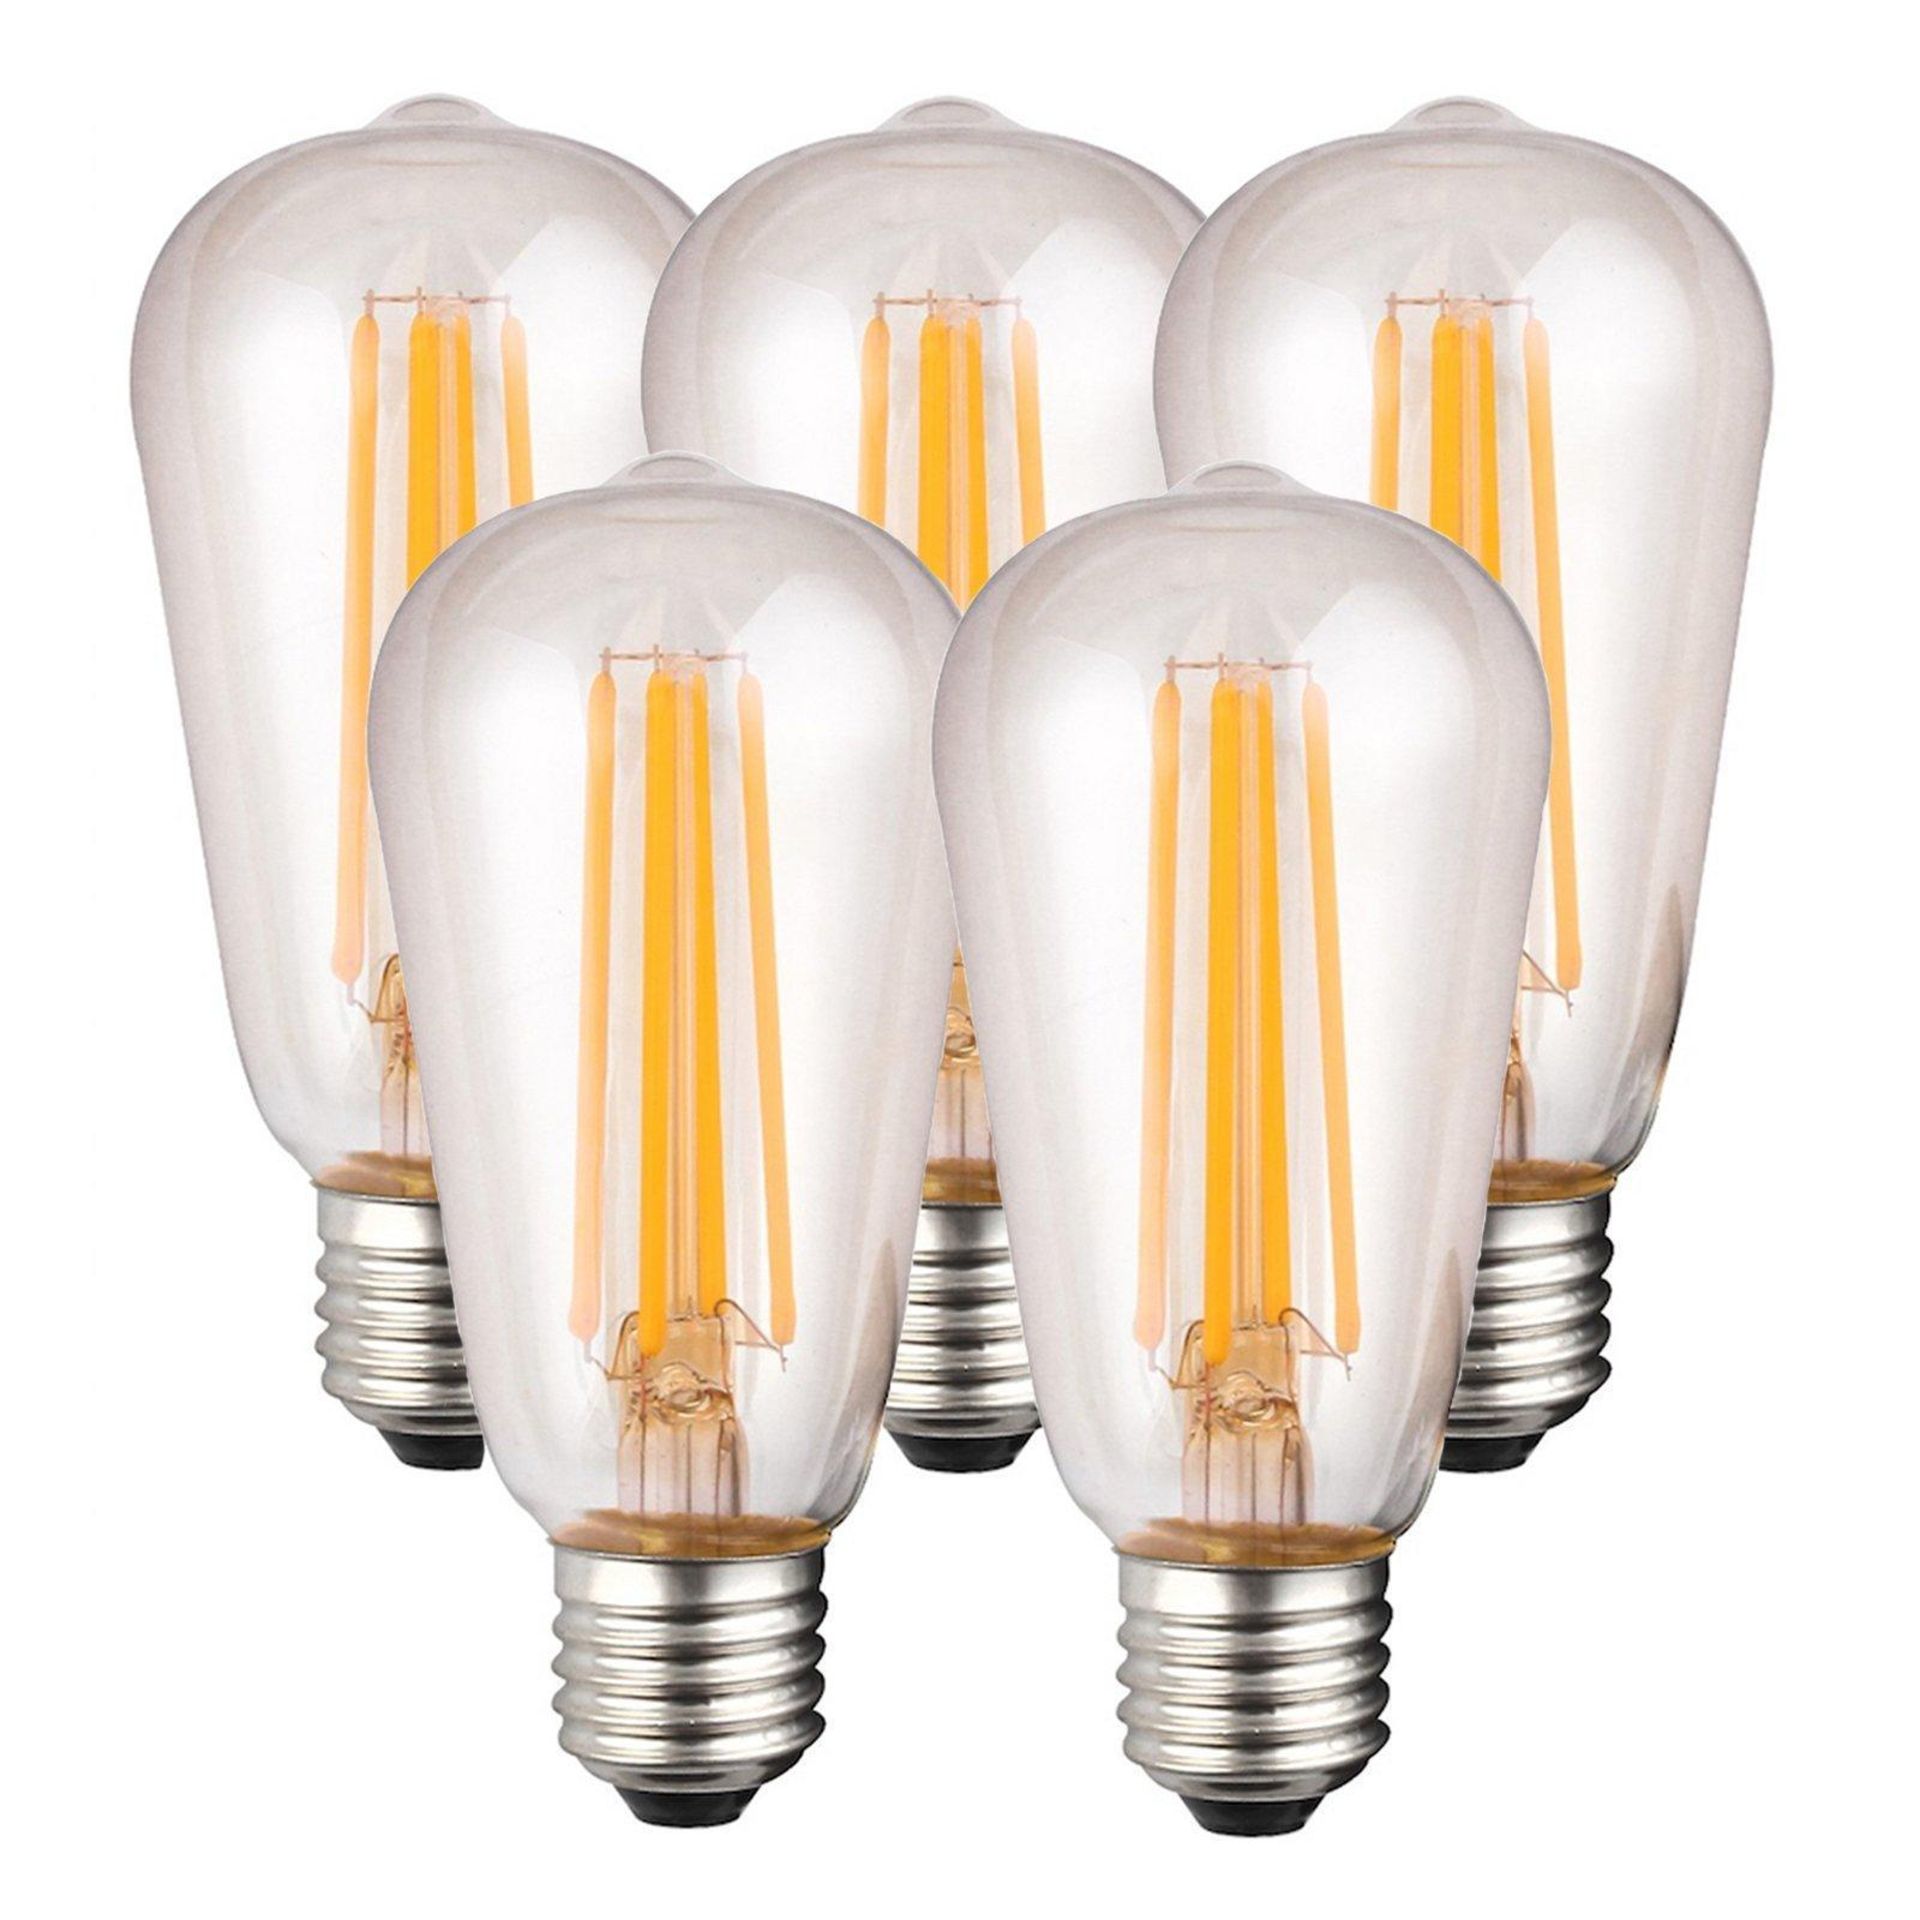 8 Watts ST64 E27 LED Bulb Clear Warm White Dimmable, Pack of 5 - ER46. Add necessary ease and